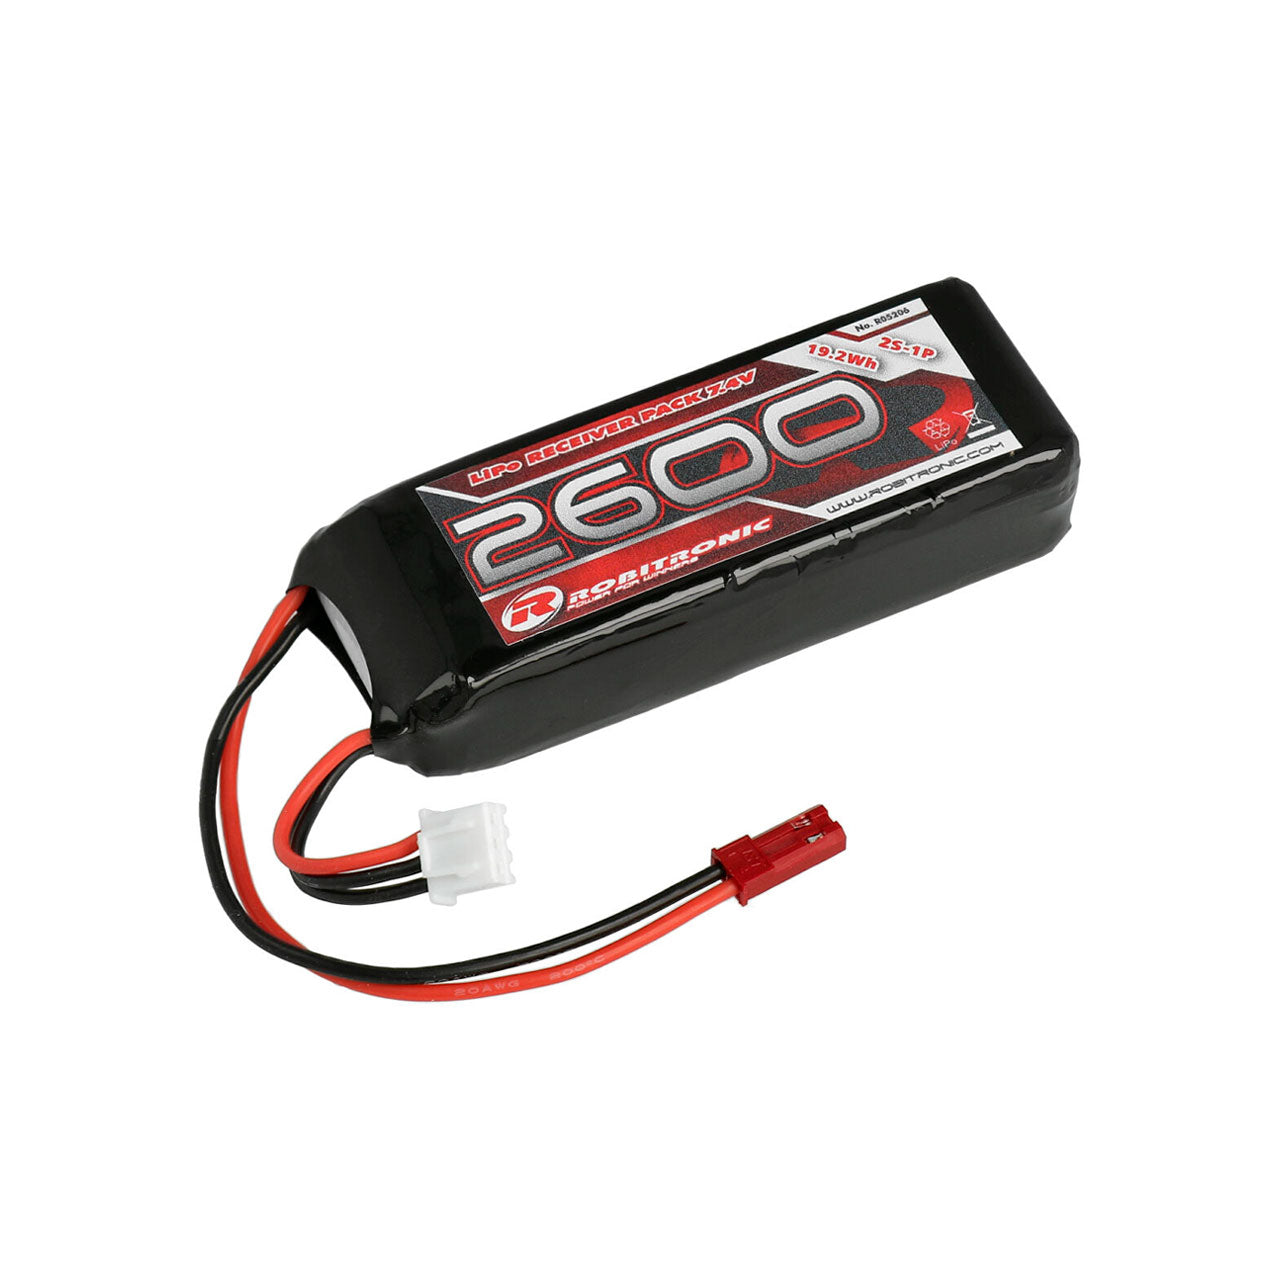 Robitronic LiPo Battery 2600mAh 2S 2/3A Straight for RX (EH)